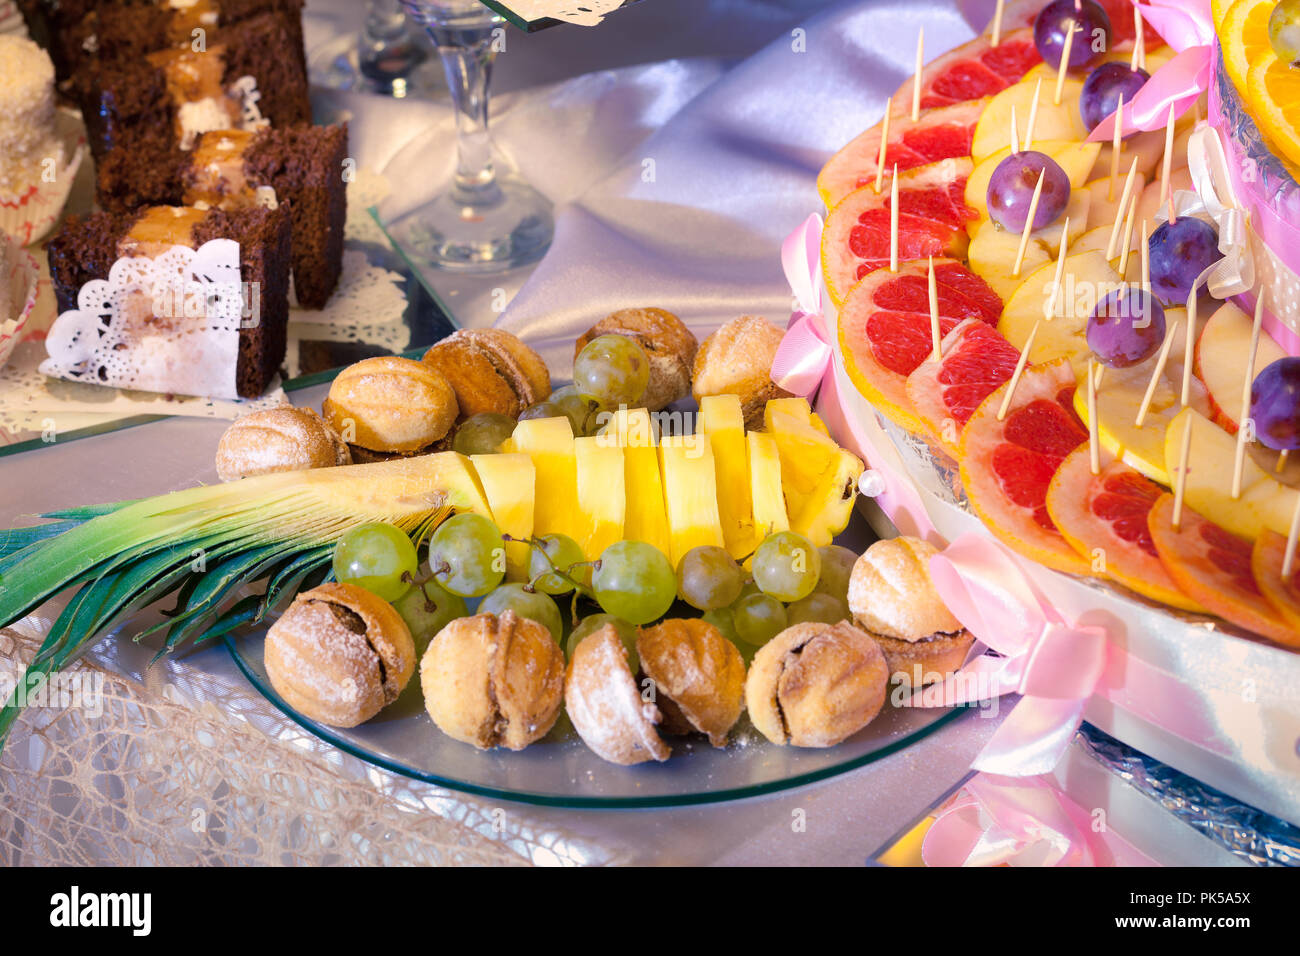 Sliced fruits and sweets for wedding table Stock Photo